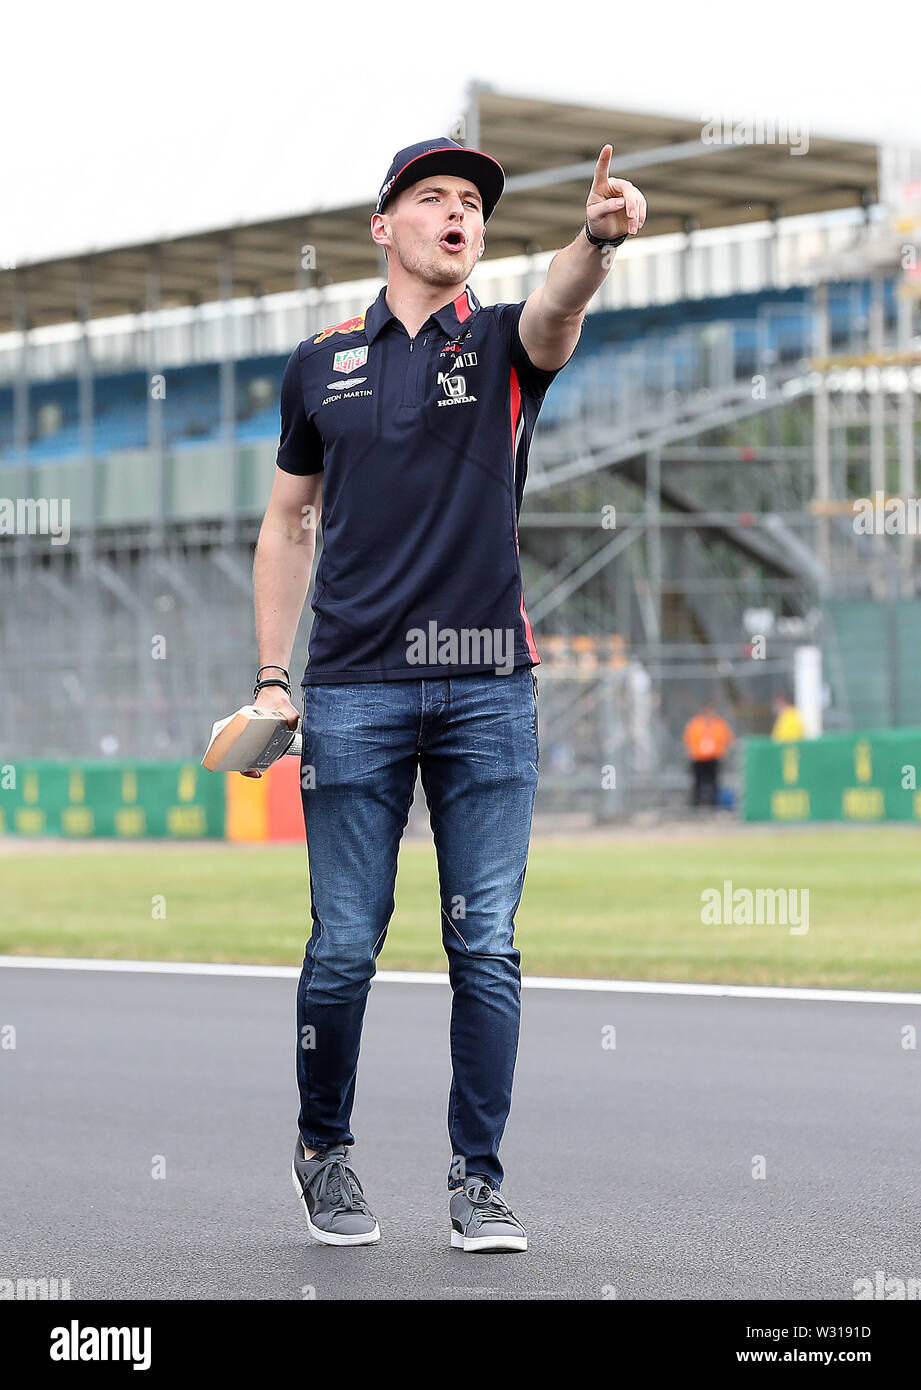 Aston Martin Red Bull driver Max Verstappen plays cricket on the finish  straight, during a preview day for the British Grand Prix at Silverstone,  Towcester Stock Photo - Alamy